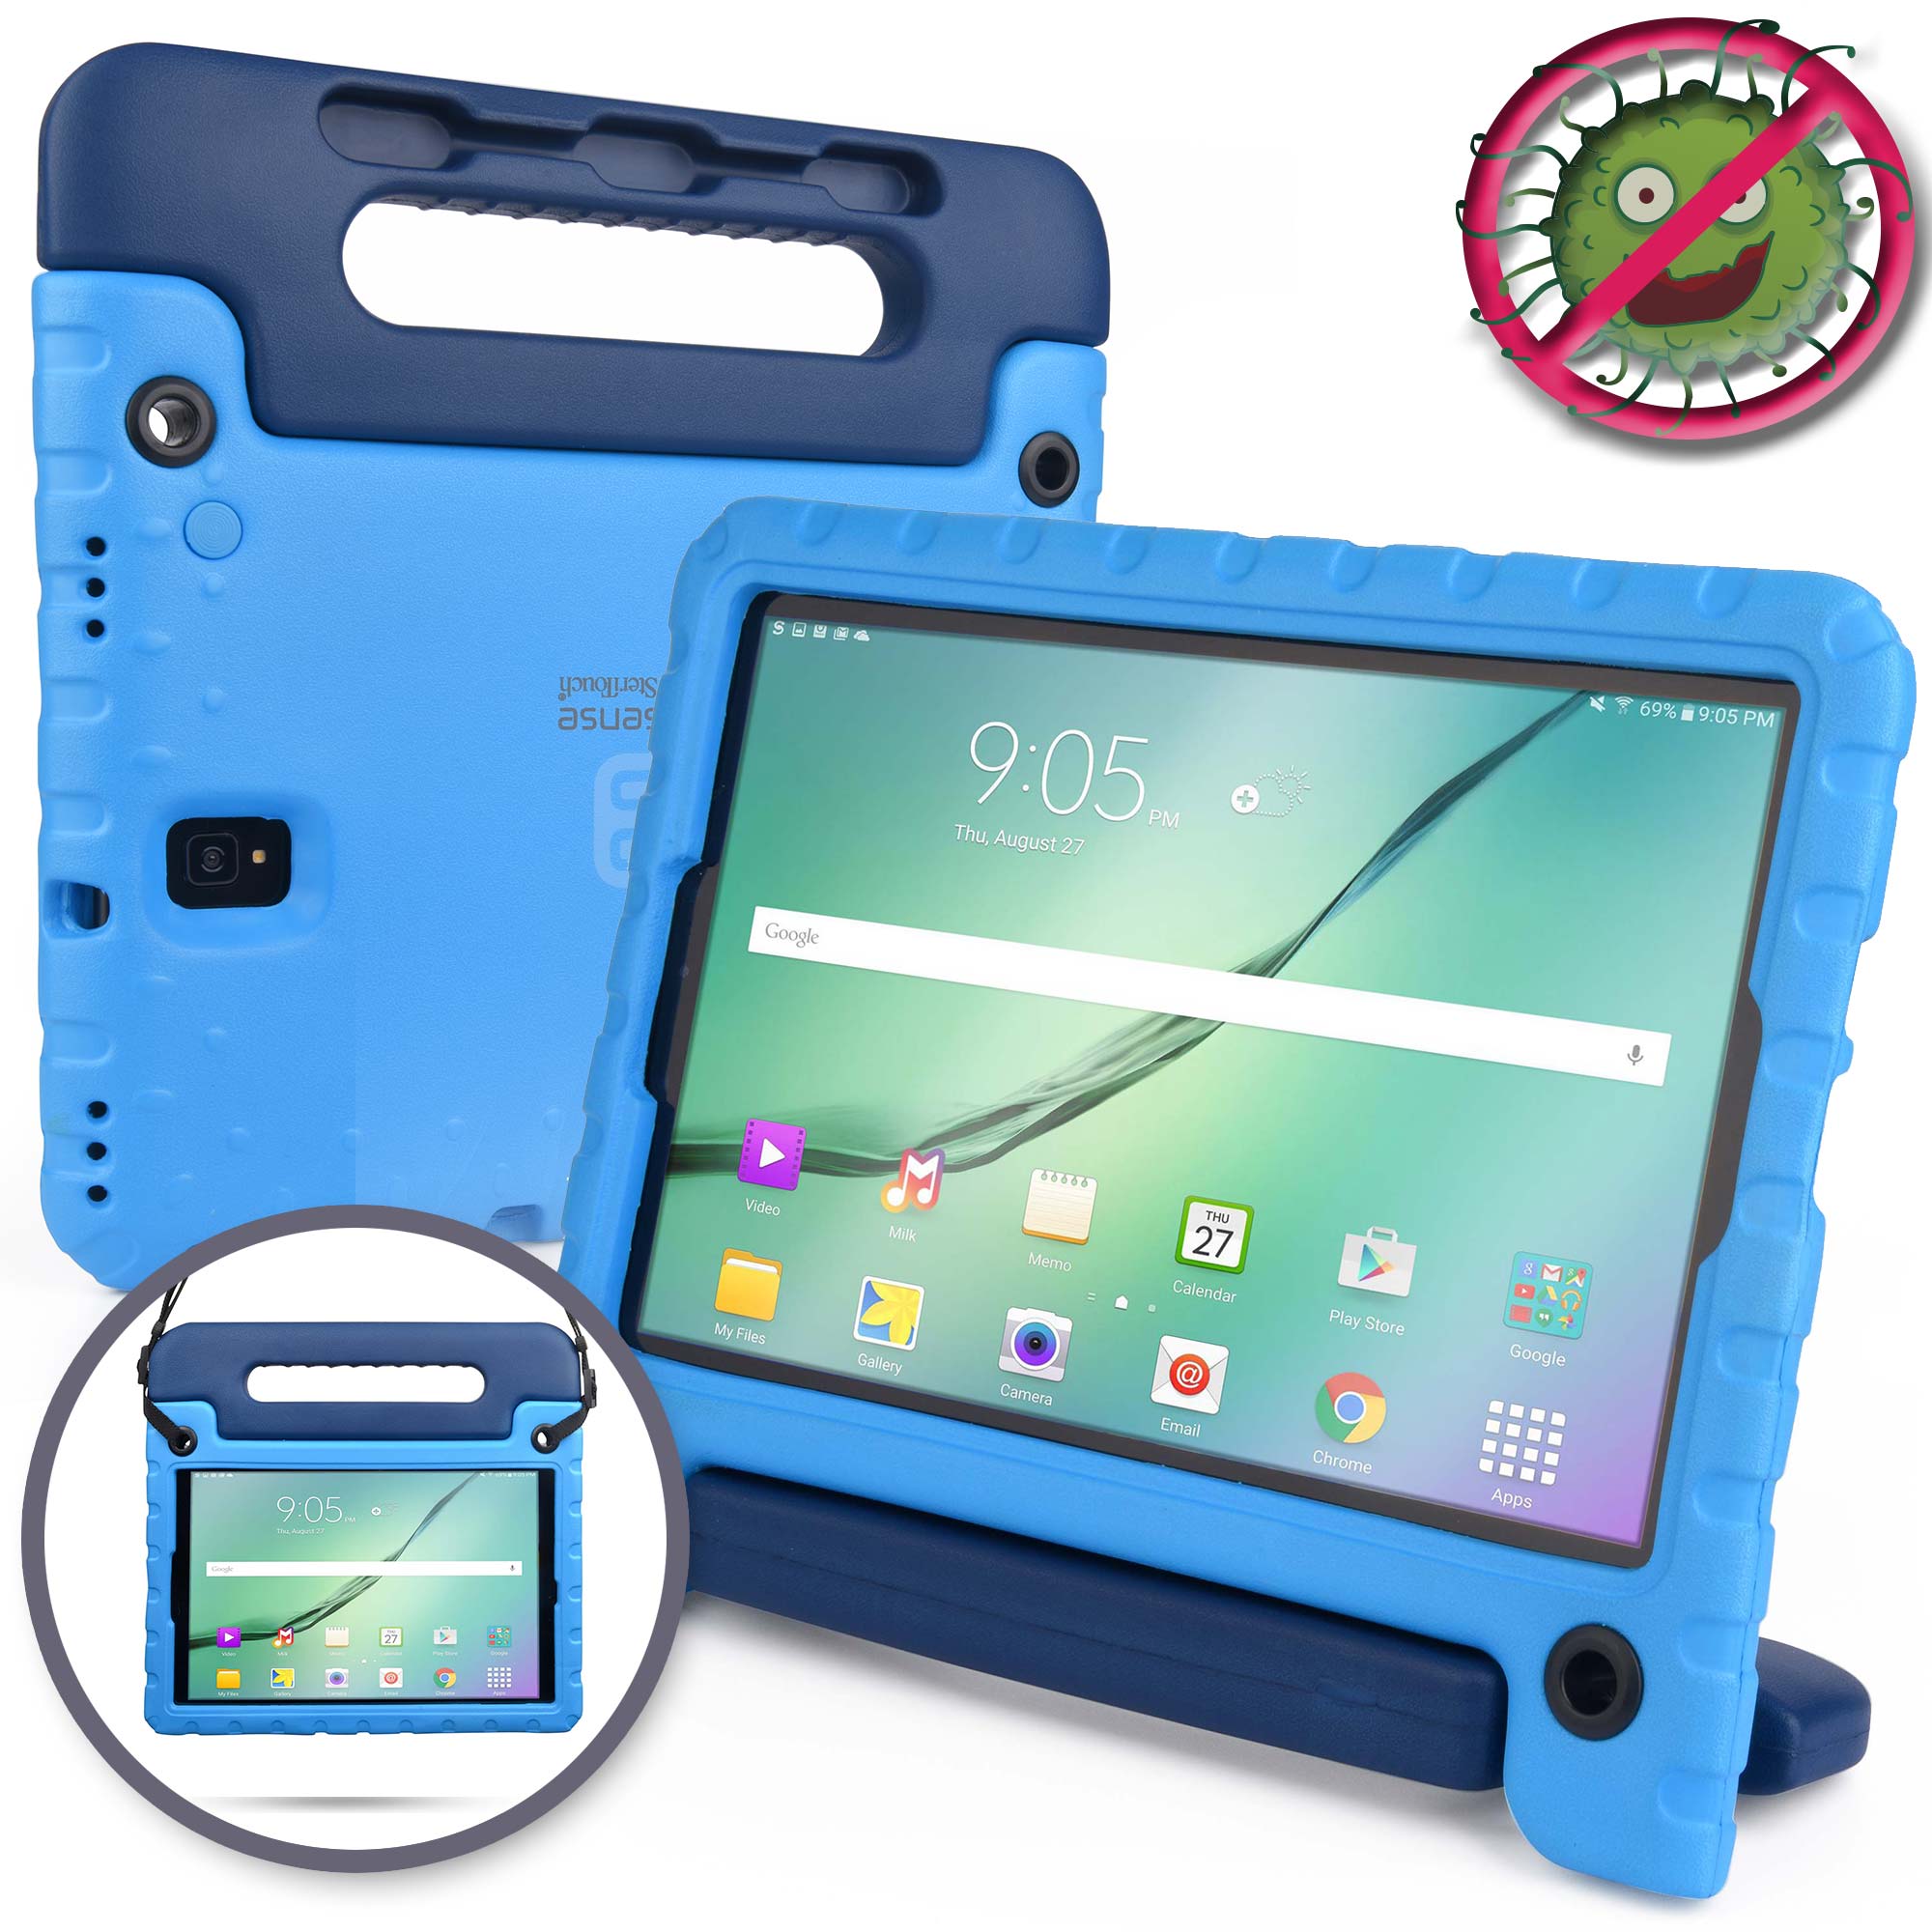 Buddy Antibacterial Protective Kids case for Samsung Galaxy Tab S4 10.5 (2018) // Handle+Stand, Stylus Storage, Shoulder Strap, Screen Spray